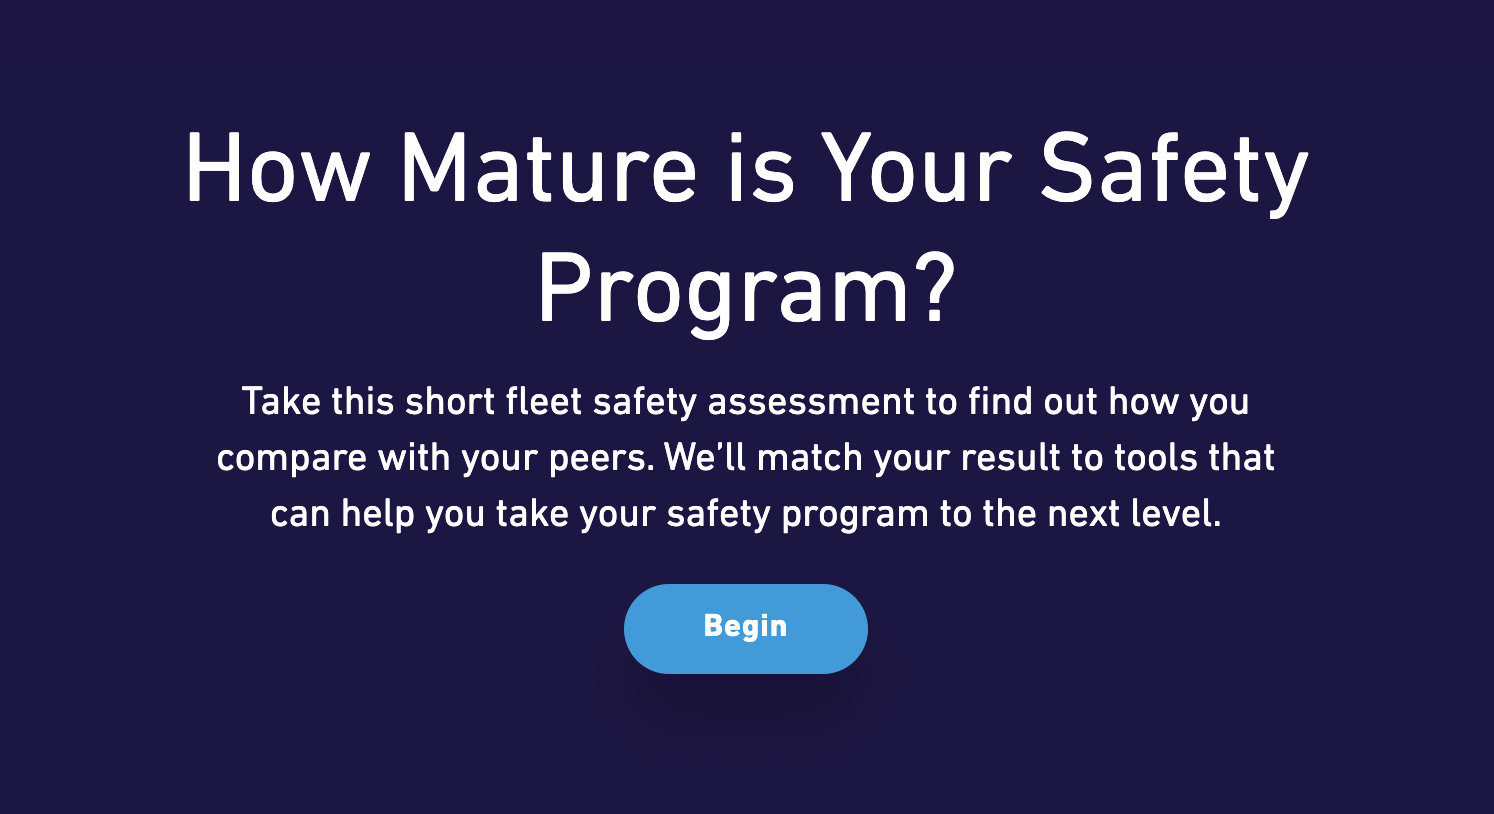 How mature is your safety program